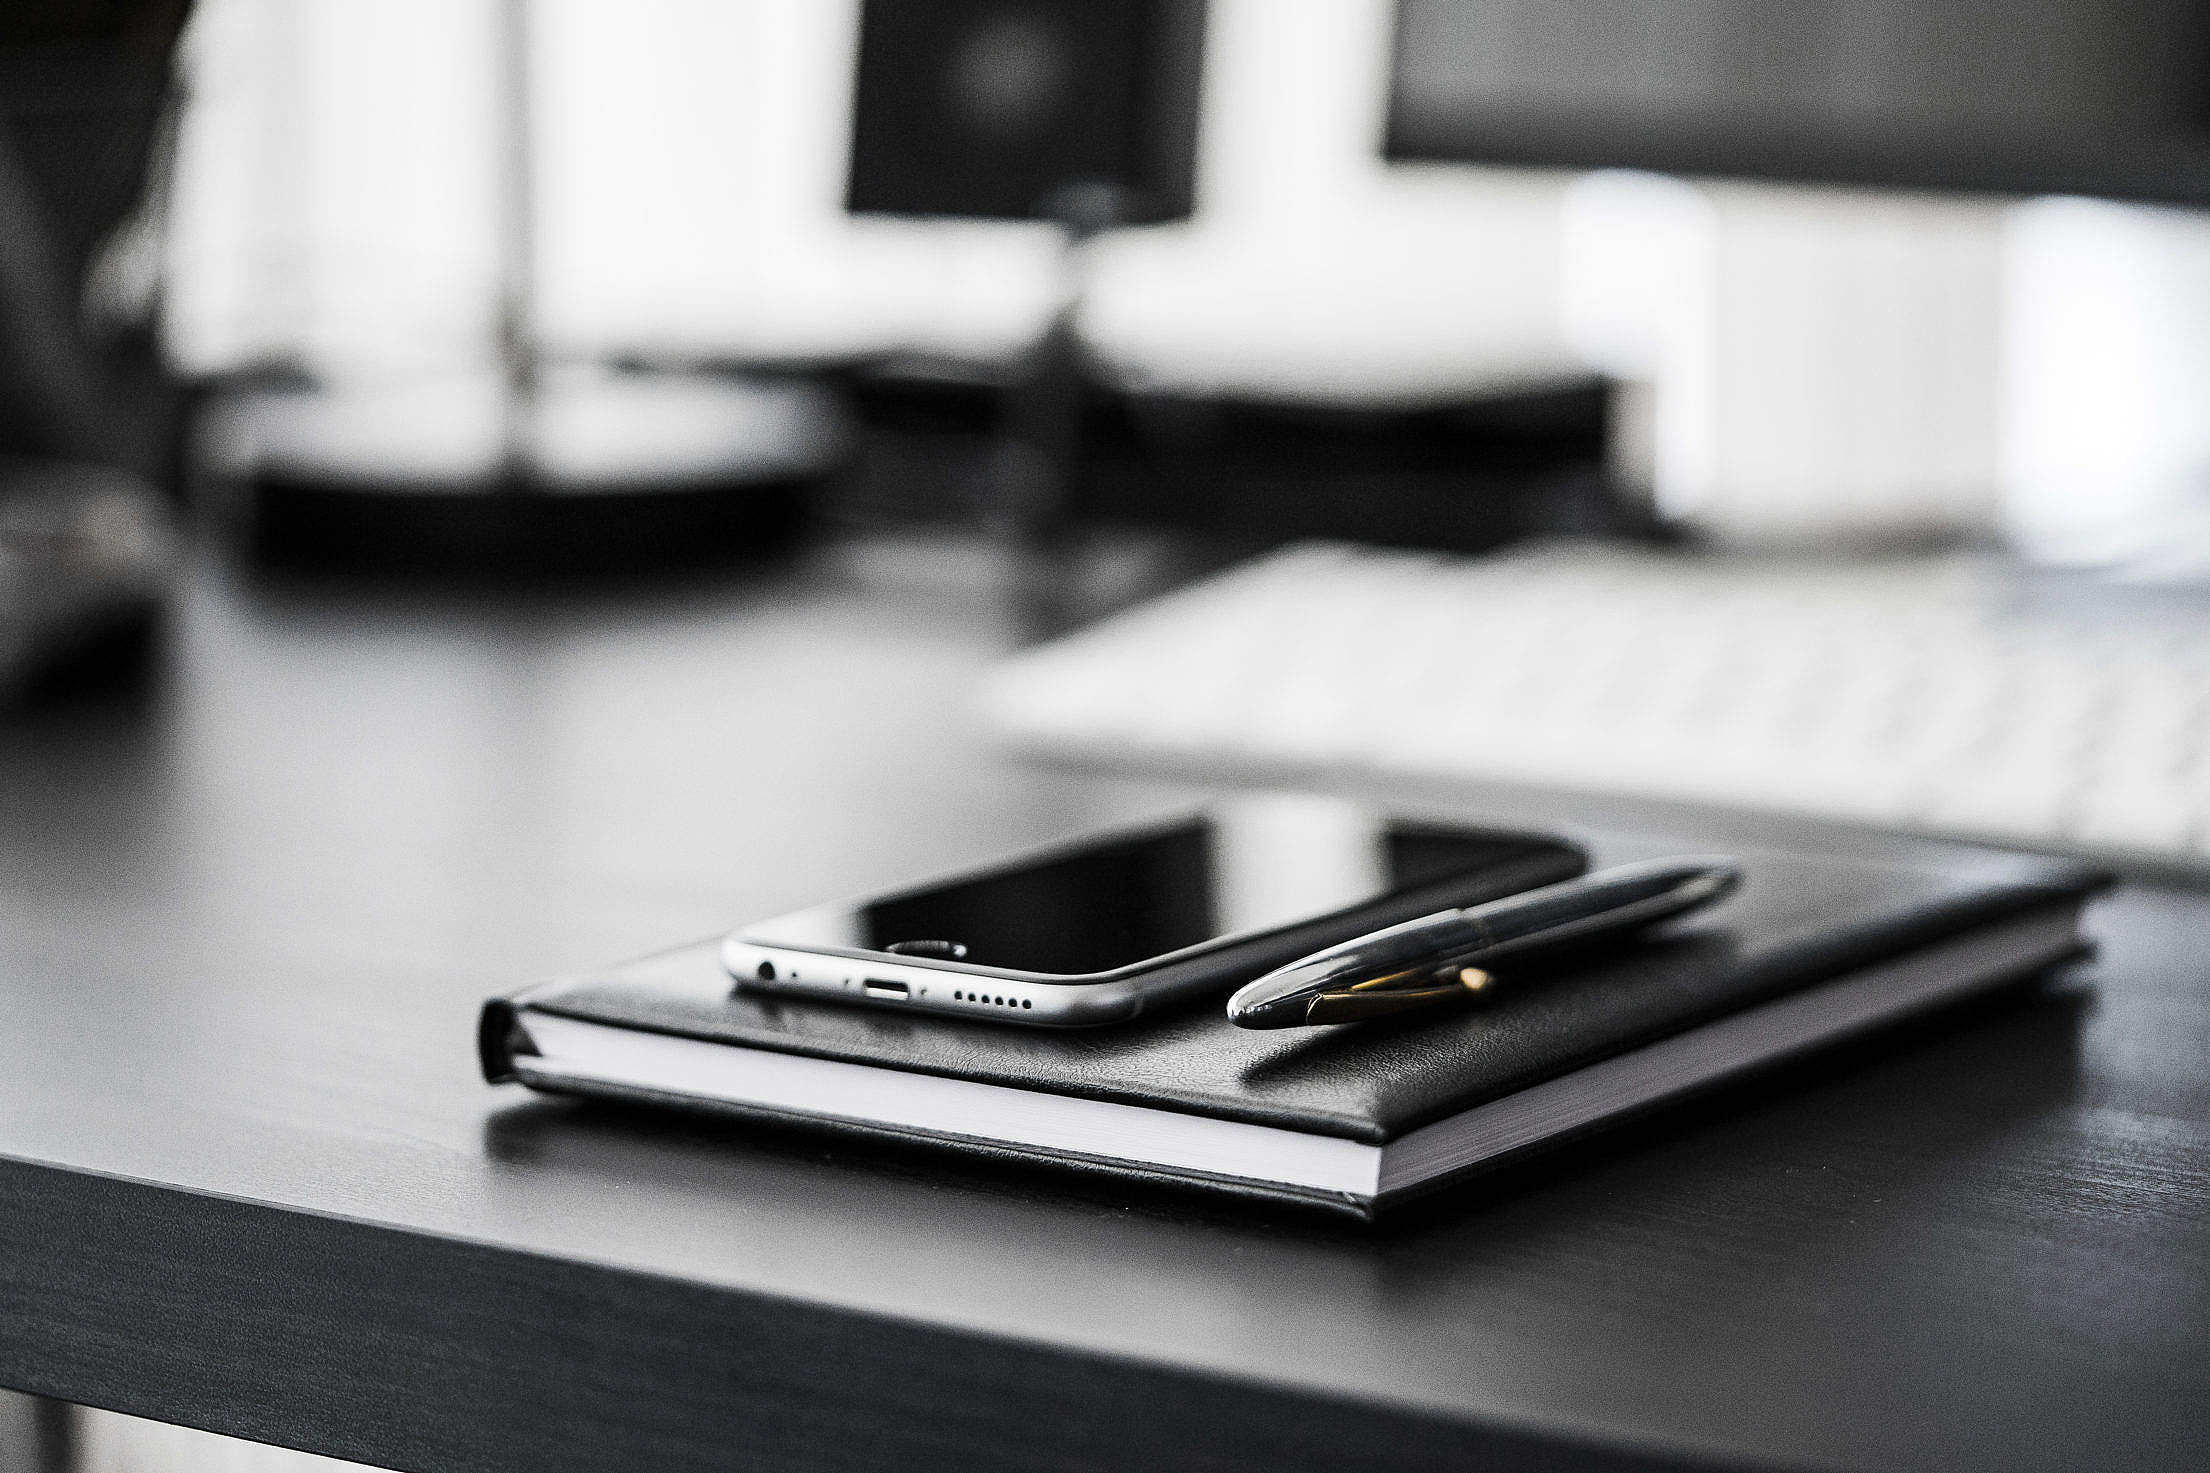 Smartphone, Diary and Silver Pen on Black Workspace Desk Free Stock Photo